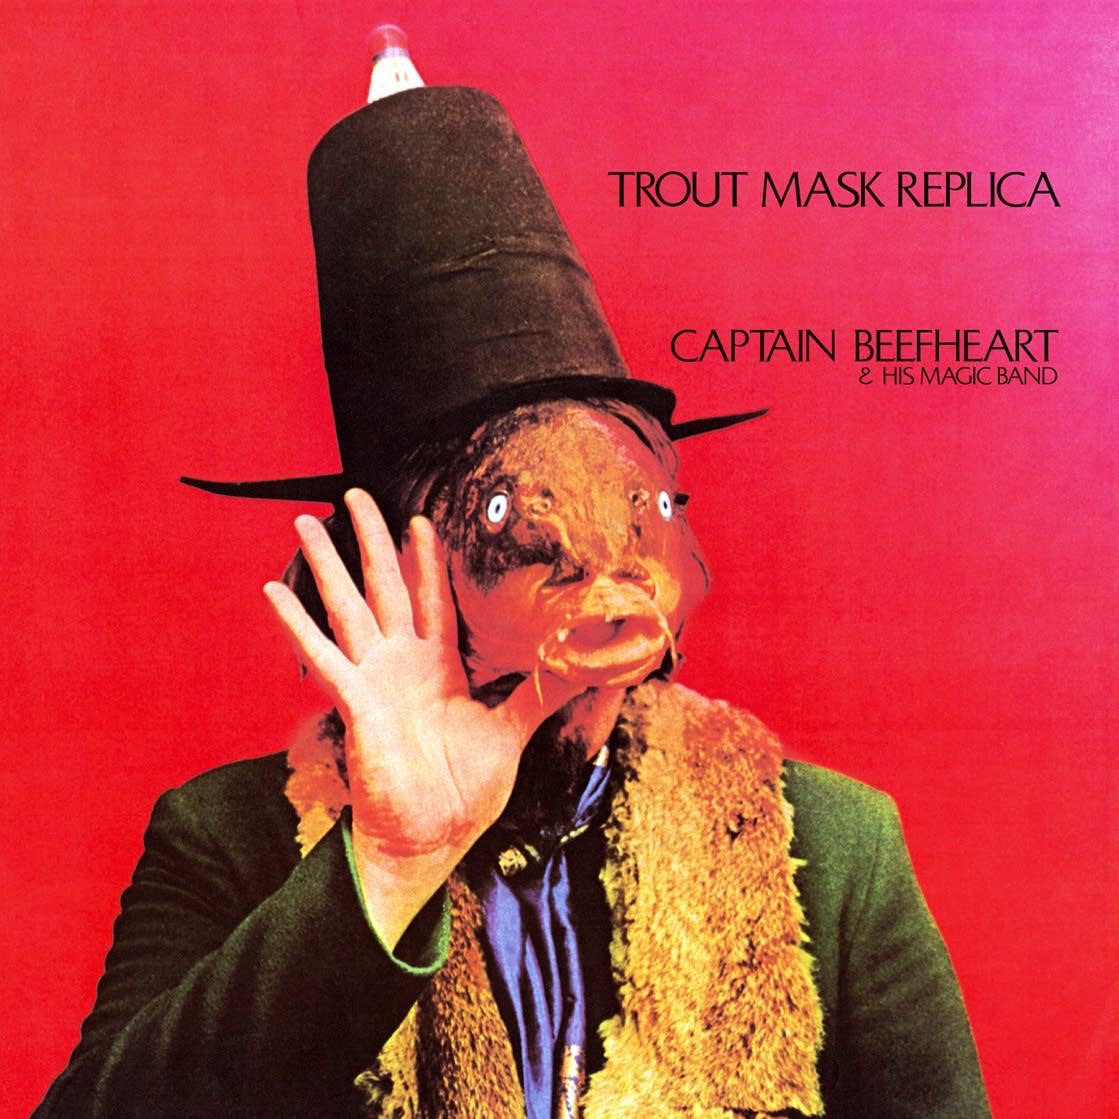 One of our favourite things about Trout Mask Replica is that the fish on the cover is in fact a carp

#CaptainBeefheart #TroutMaskReplica